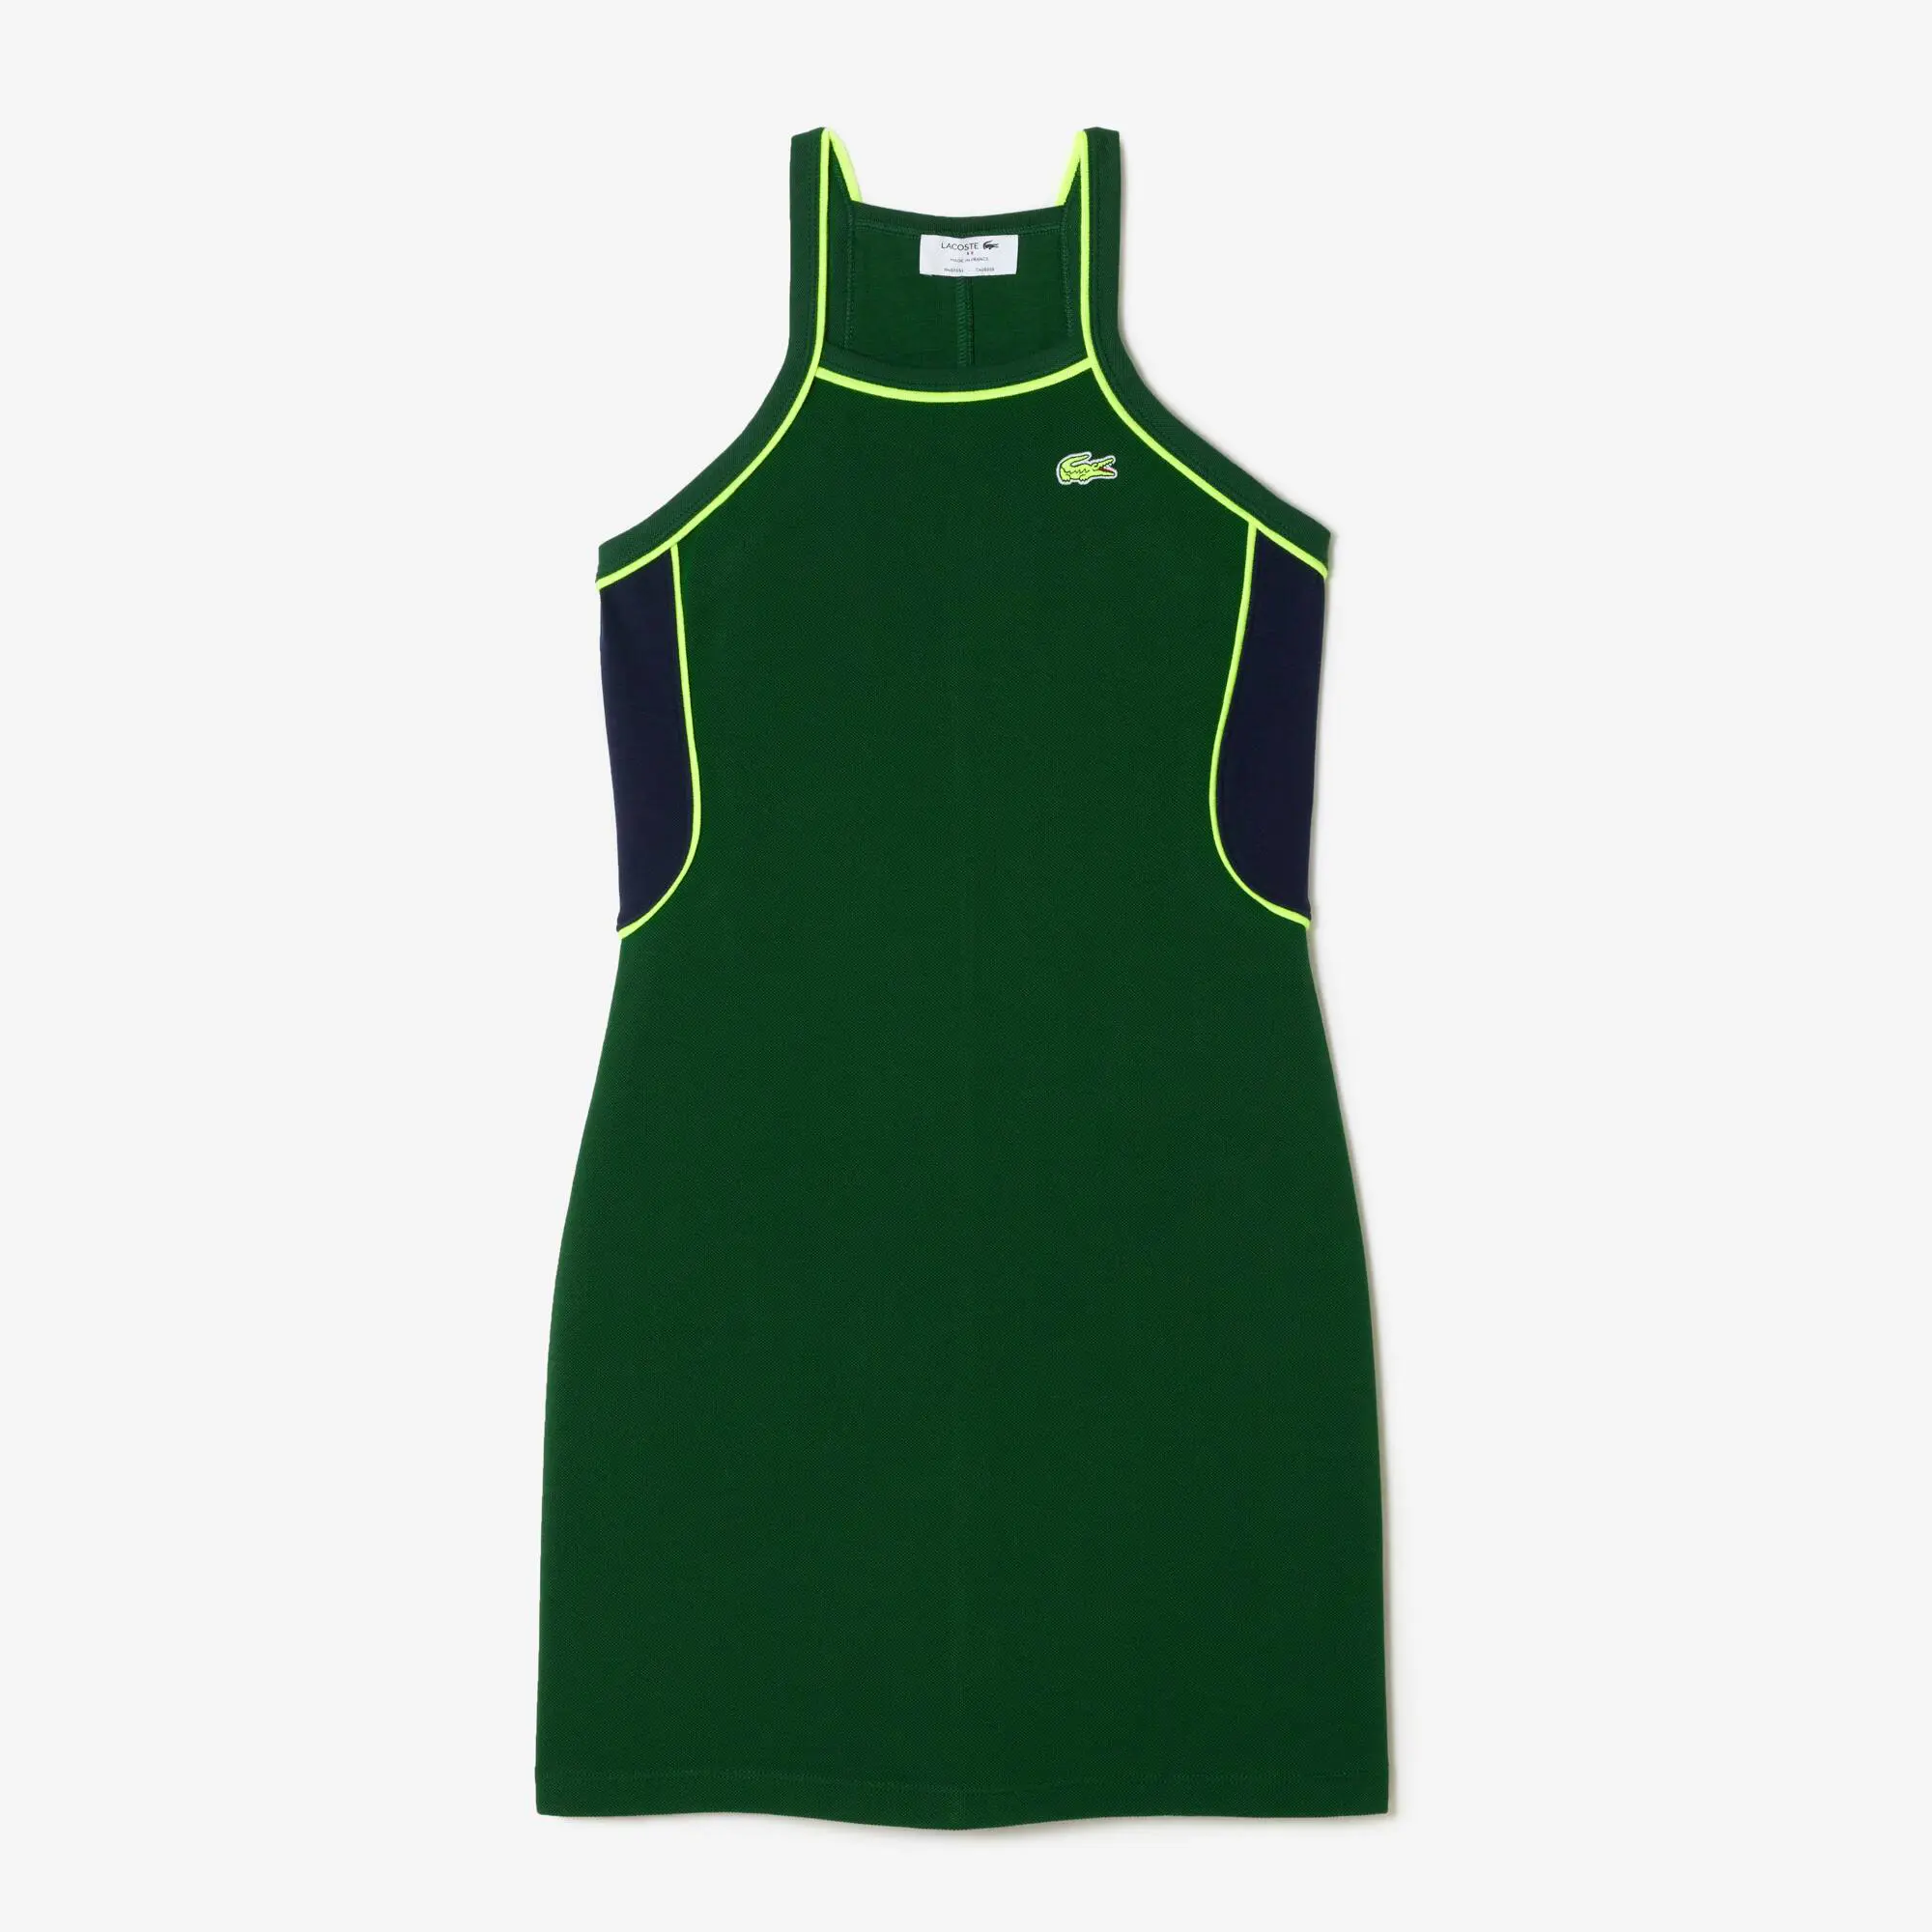 Lacoste Women’s Lacoste Organic Cotton French Made Tennis Dress. 2